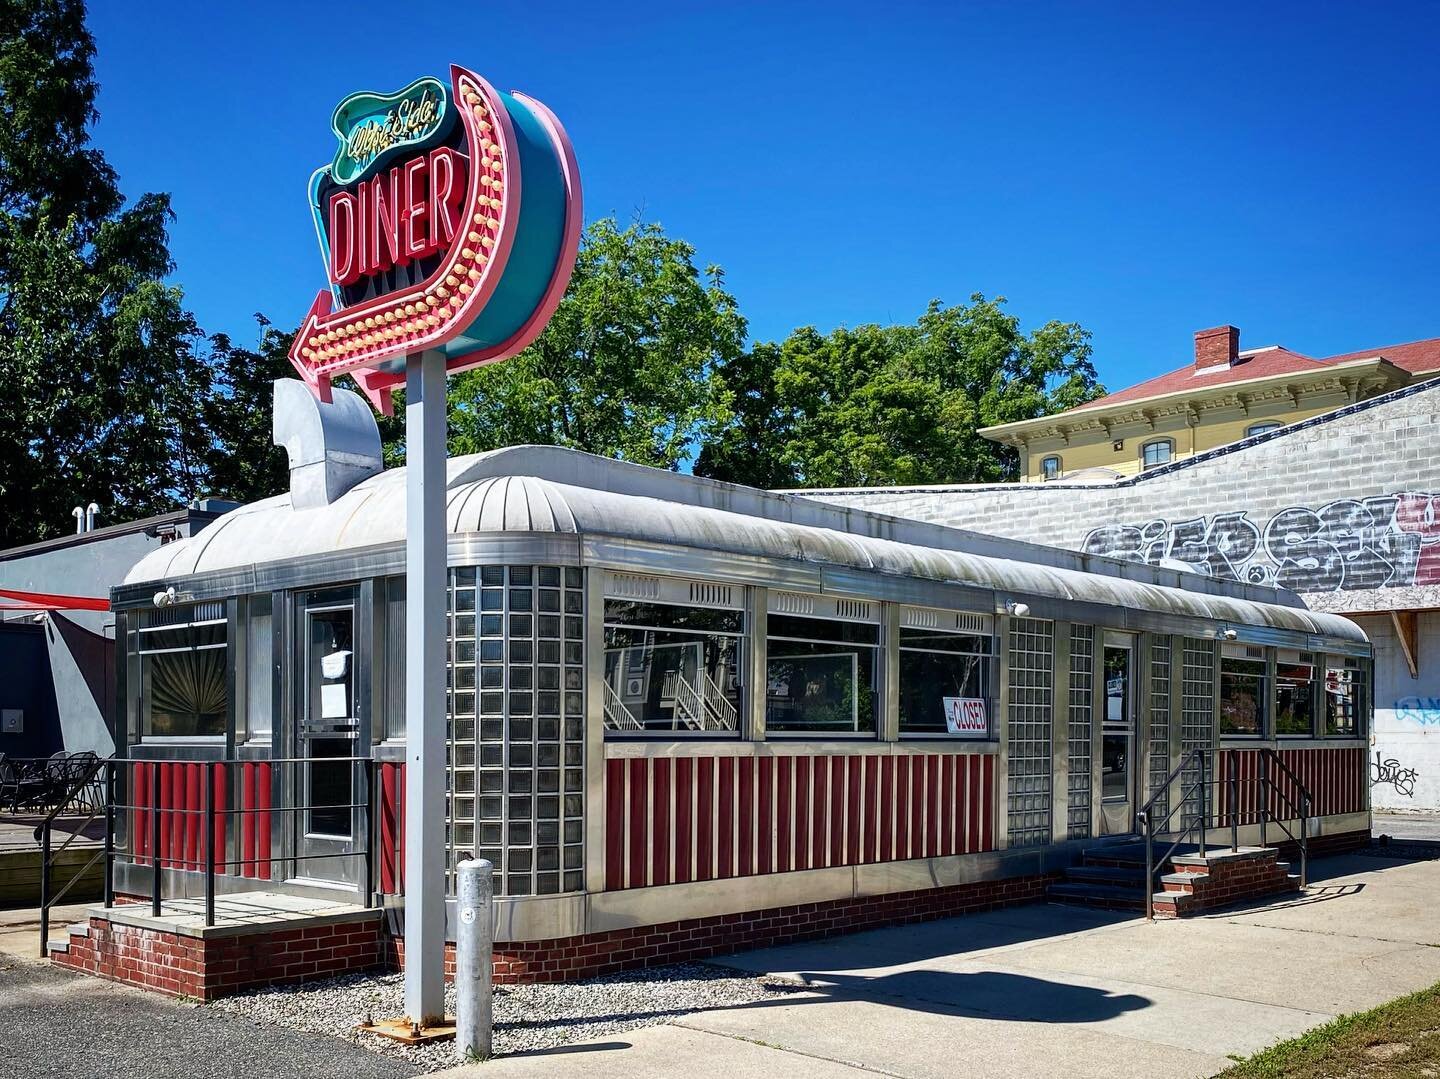 I conclude my Providence, RI diner tour with the West Side Diner. Listed on the National Register of Historic Places since 2003, this 1947 Kullman Diner started its journey as Poirier&rsquo;s Diner serving the many manufacturing workers in the Olneyv